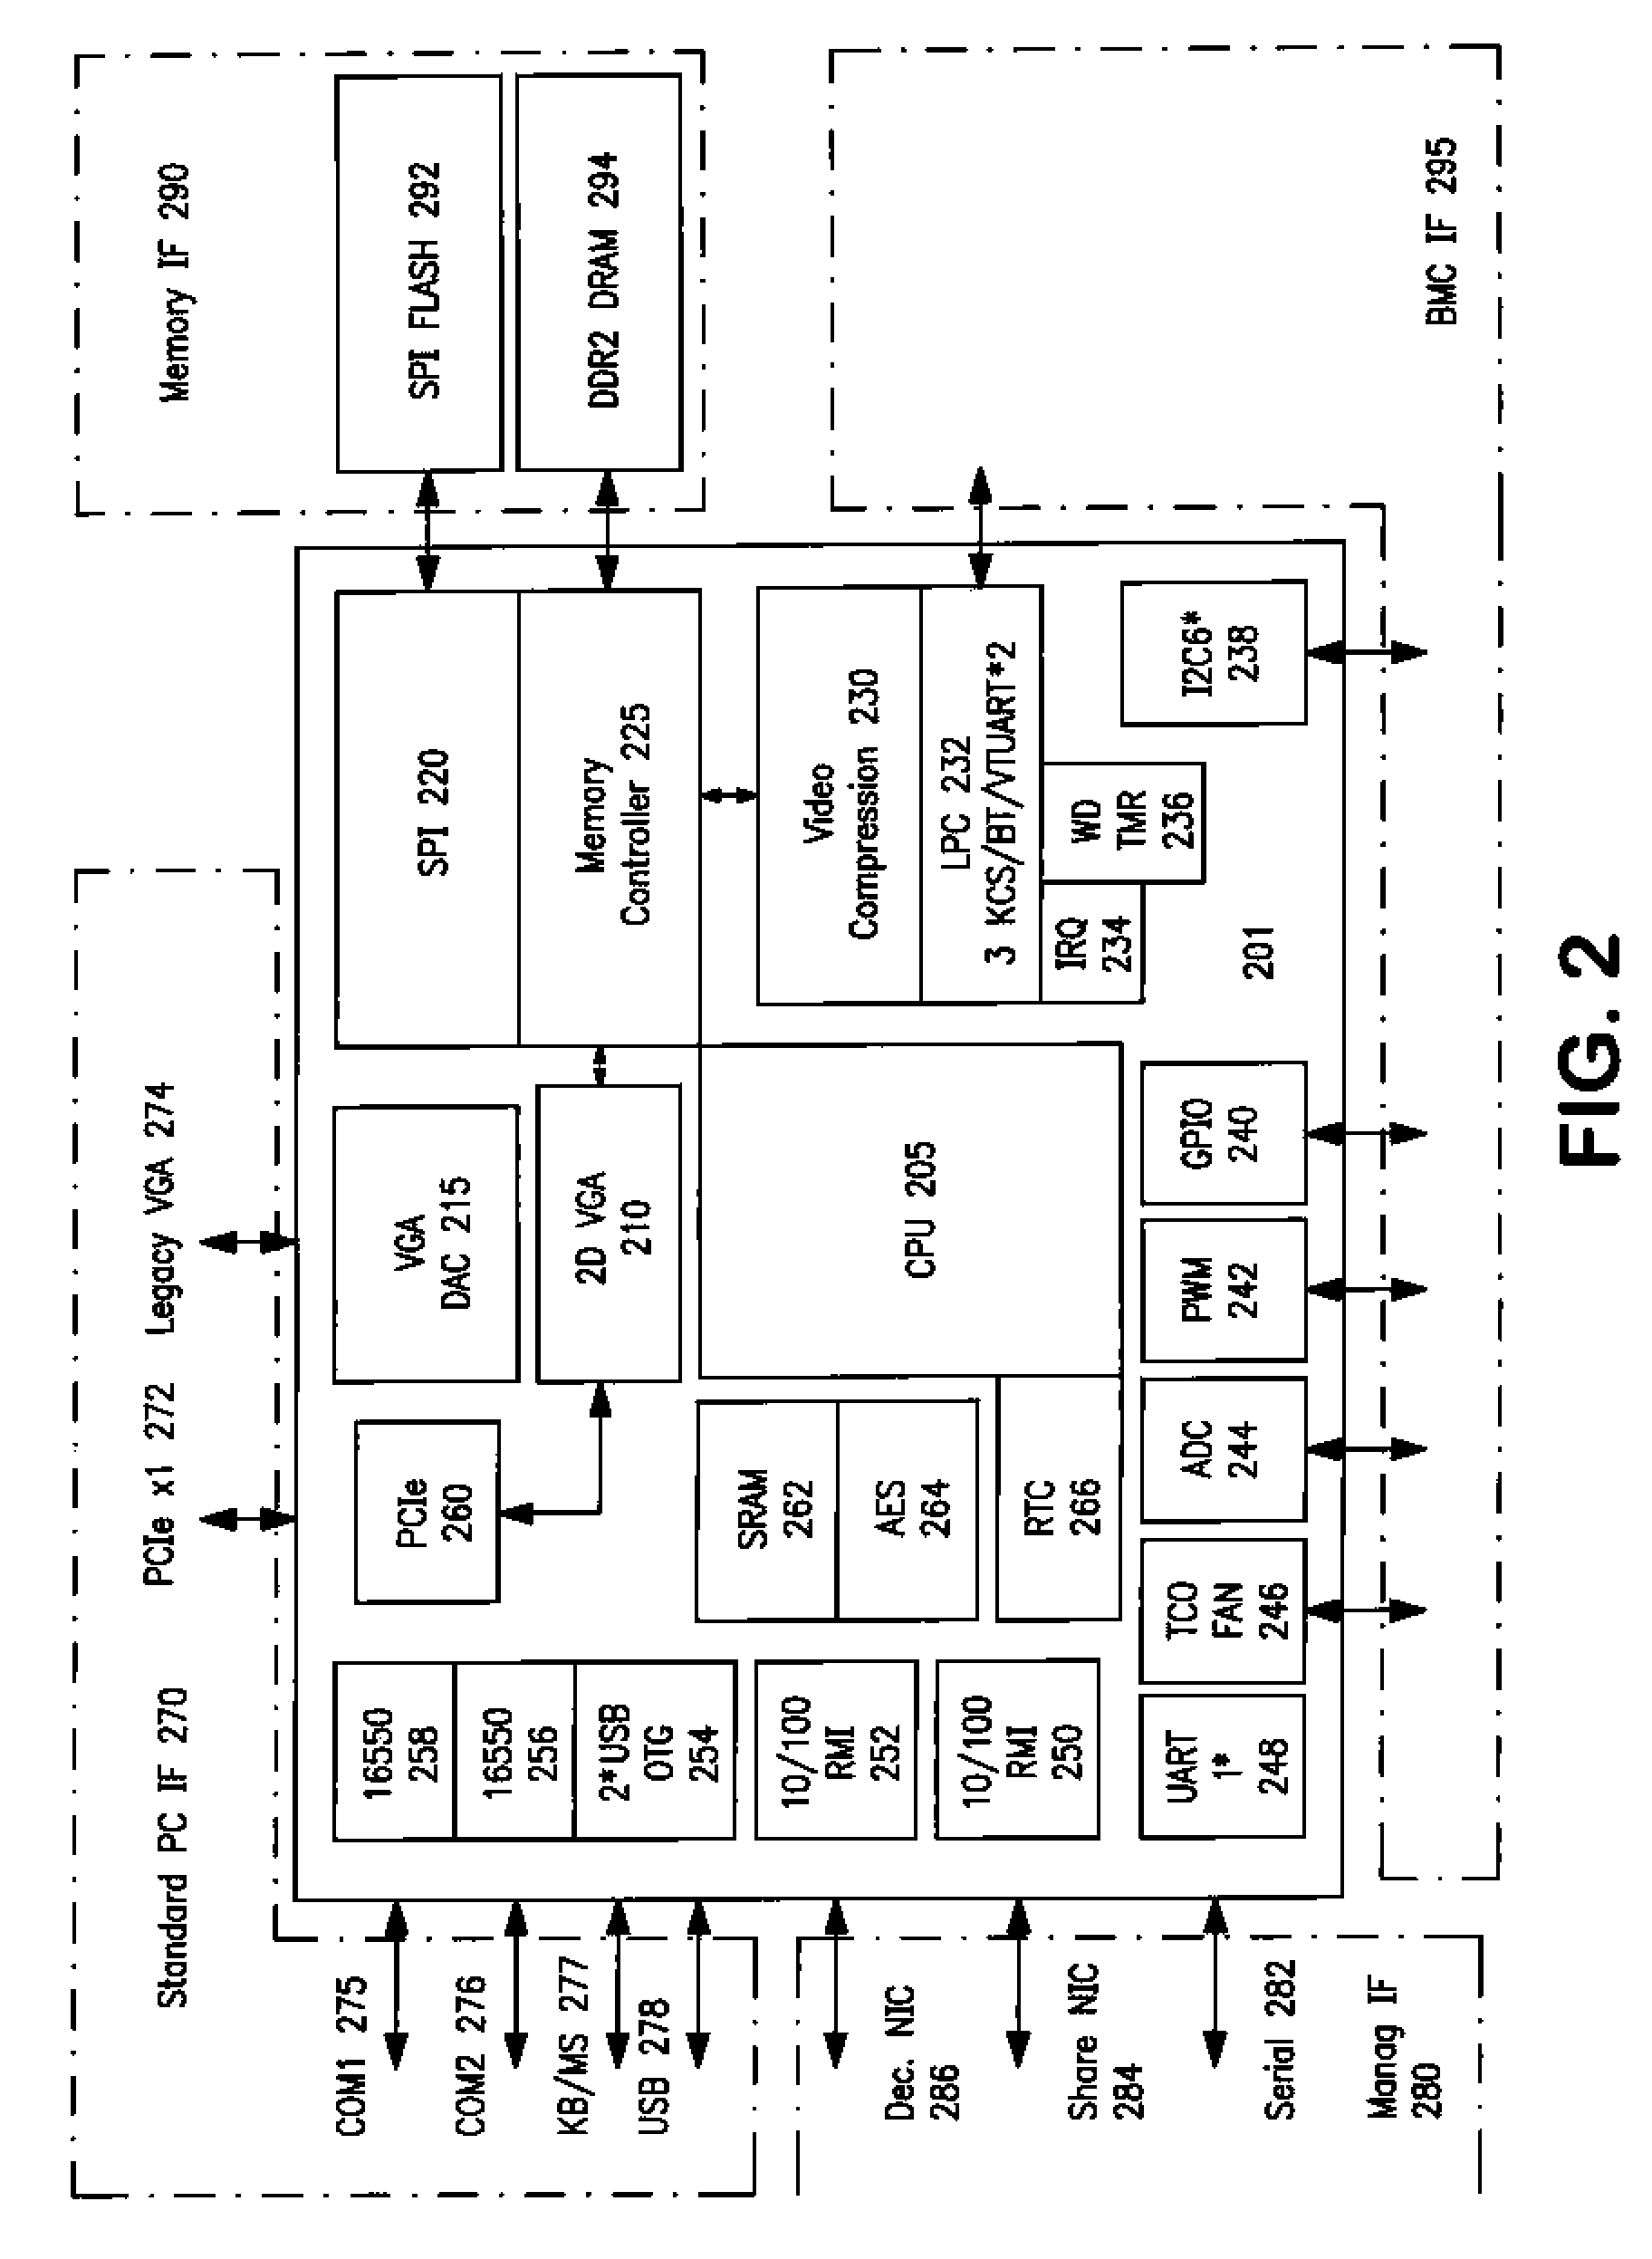 Architecture and Method for Remote Platform Control Management